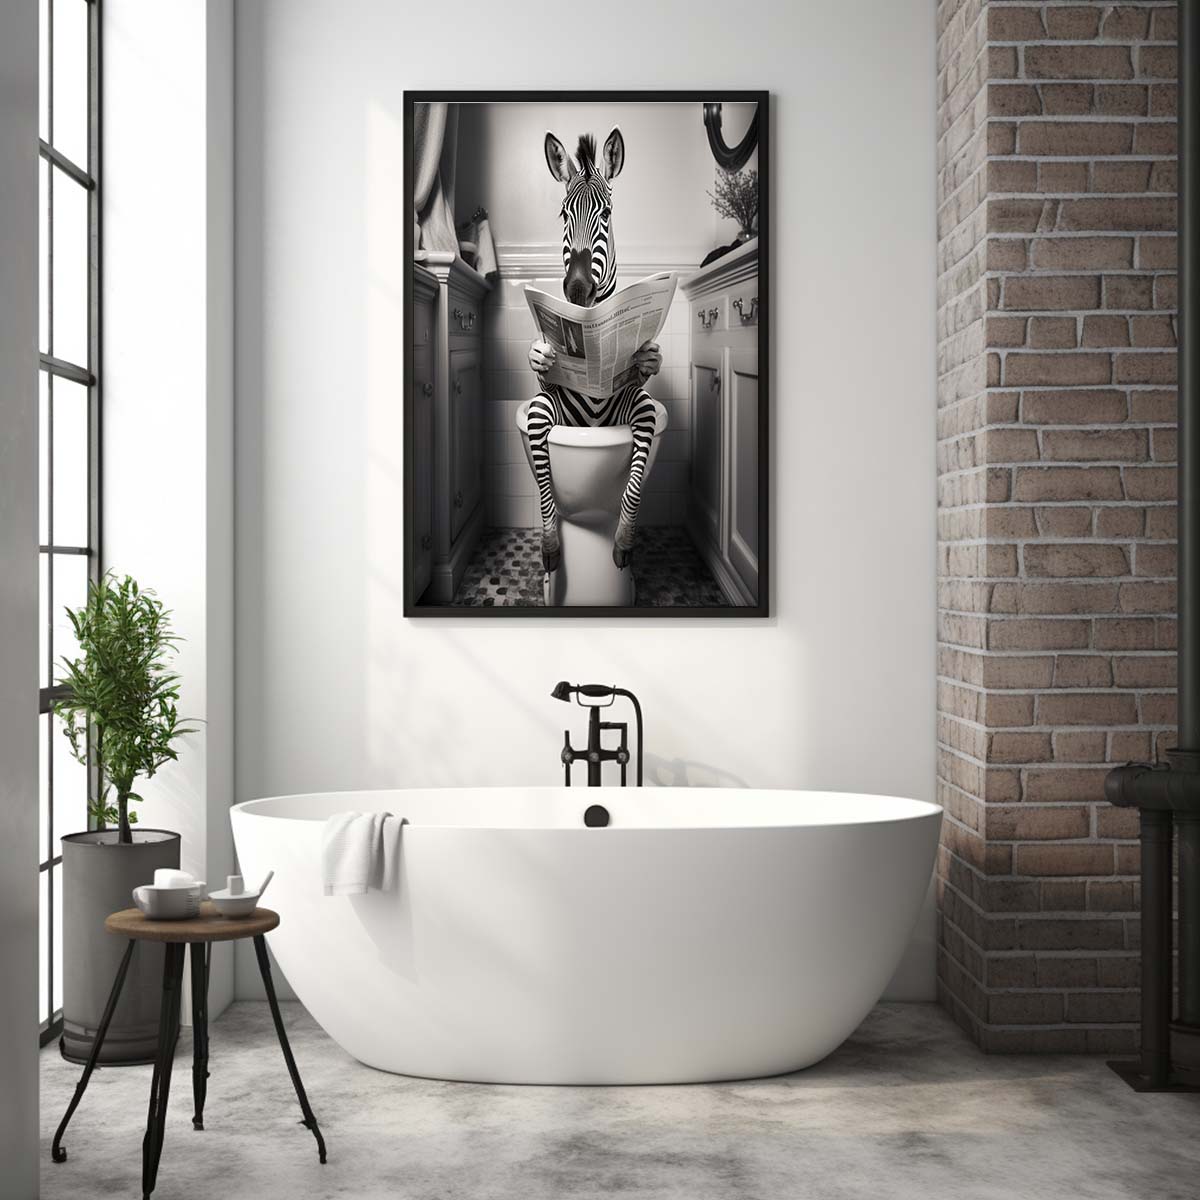 Zebra Sitting on the Toilet Reading a Newspaper, Funny Bathroom Wall Decor, Funny Animal Print, Home Printables, Digital Download